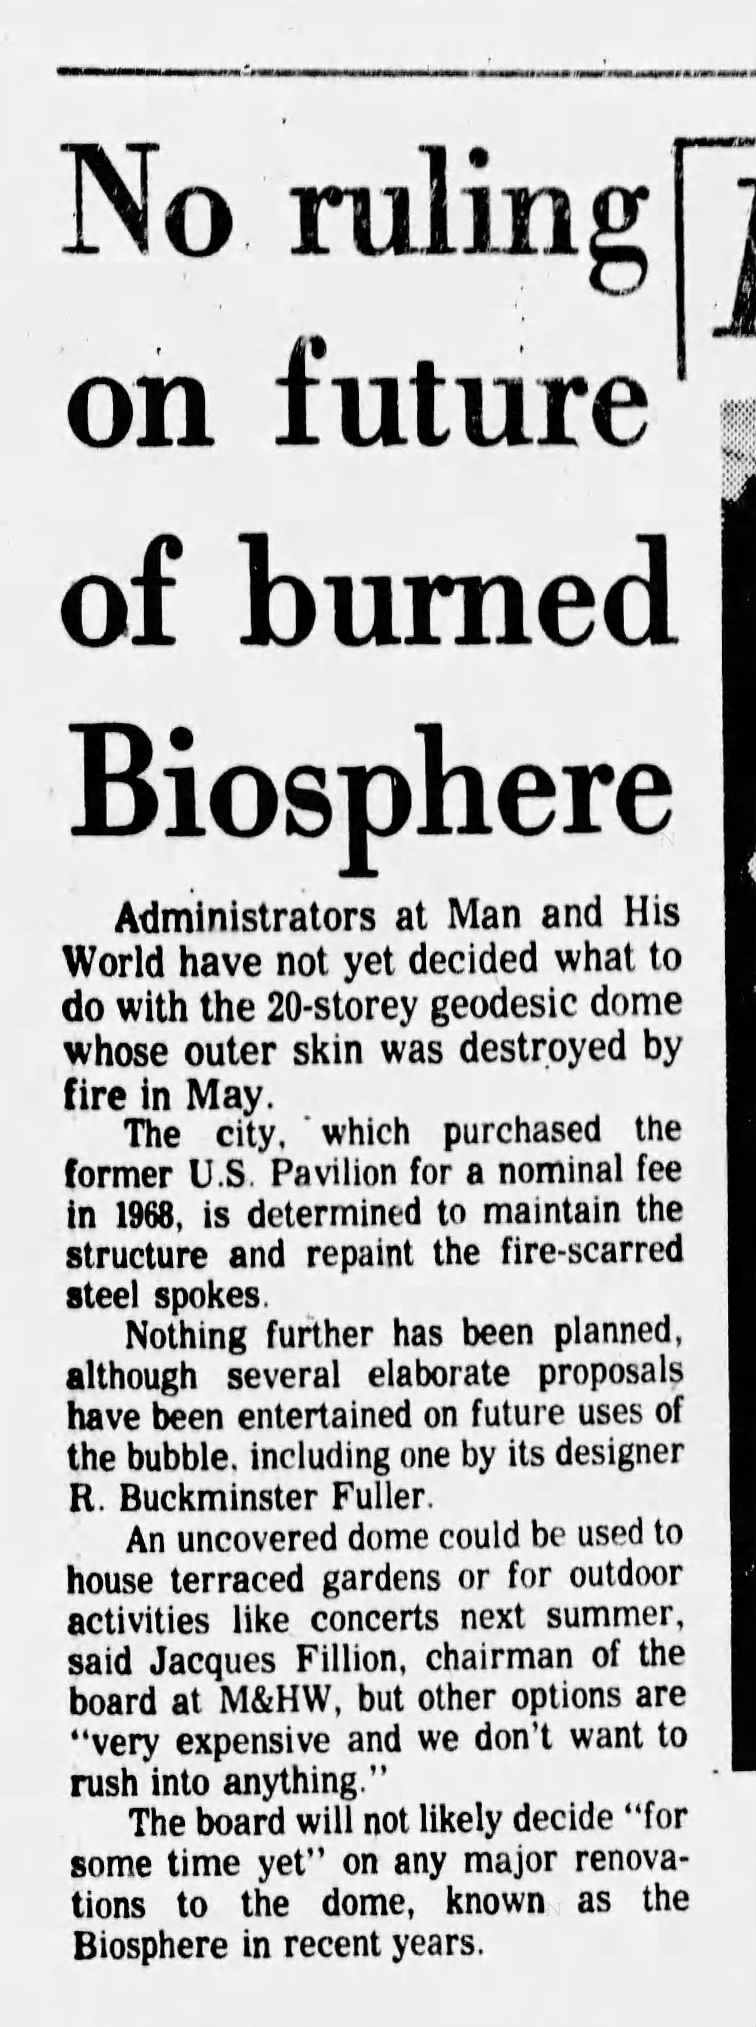 No ruling on future of burned Biosphere